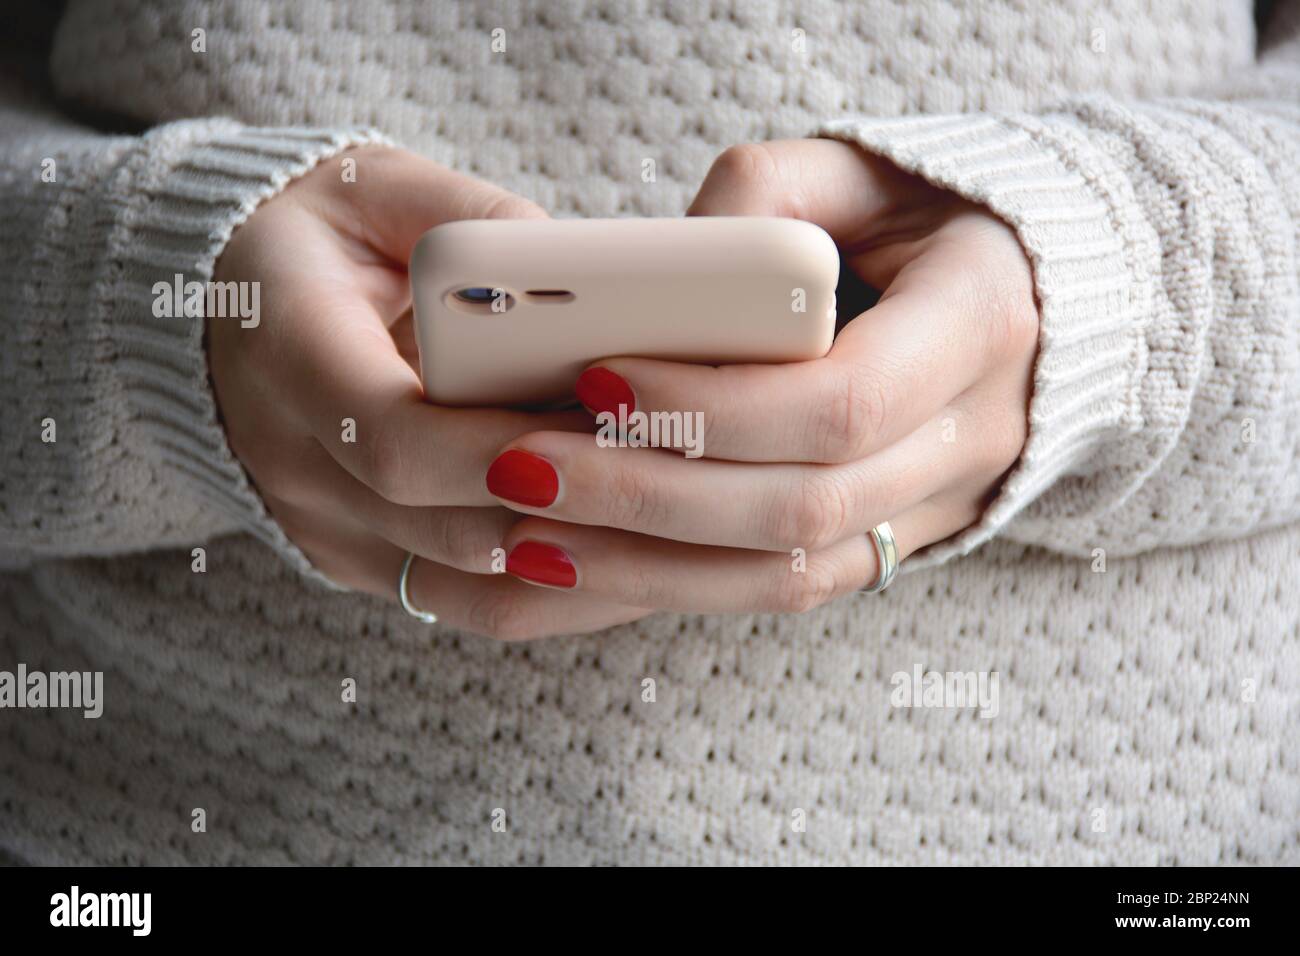 Close up woman with red nails using her mobile phone. Sending a message with smartphone. Front view Stock Photo